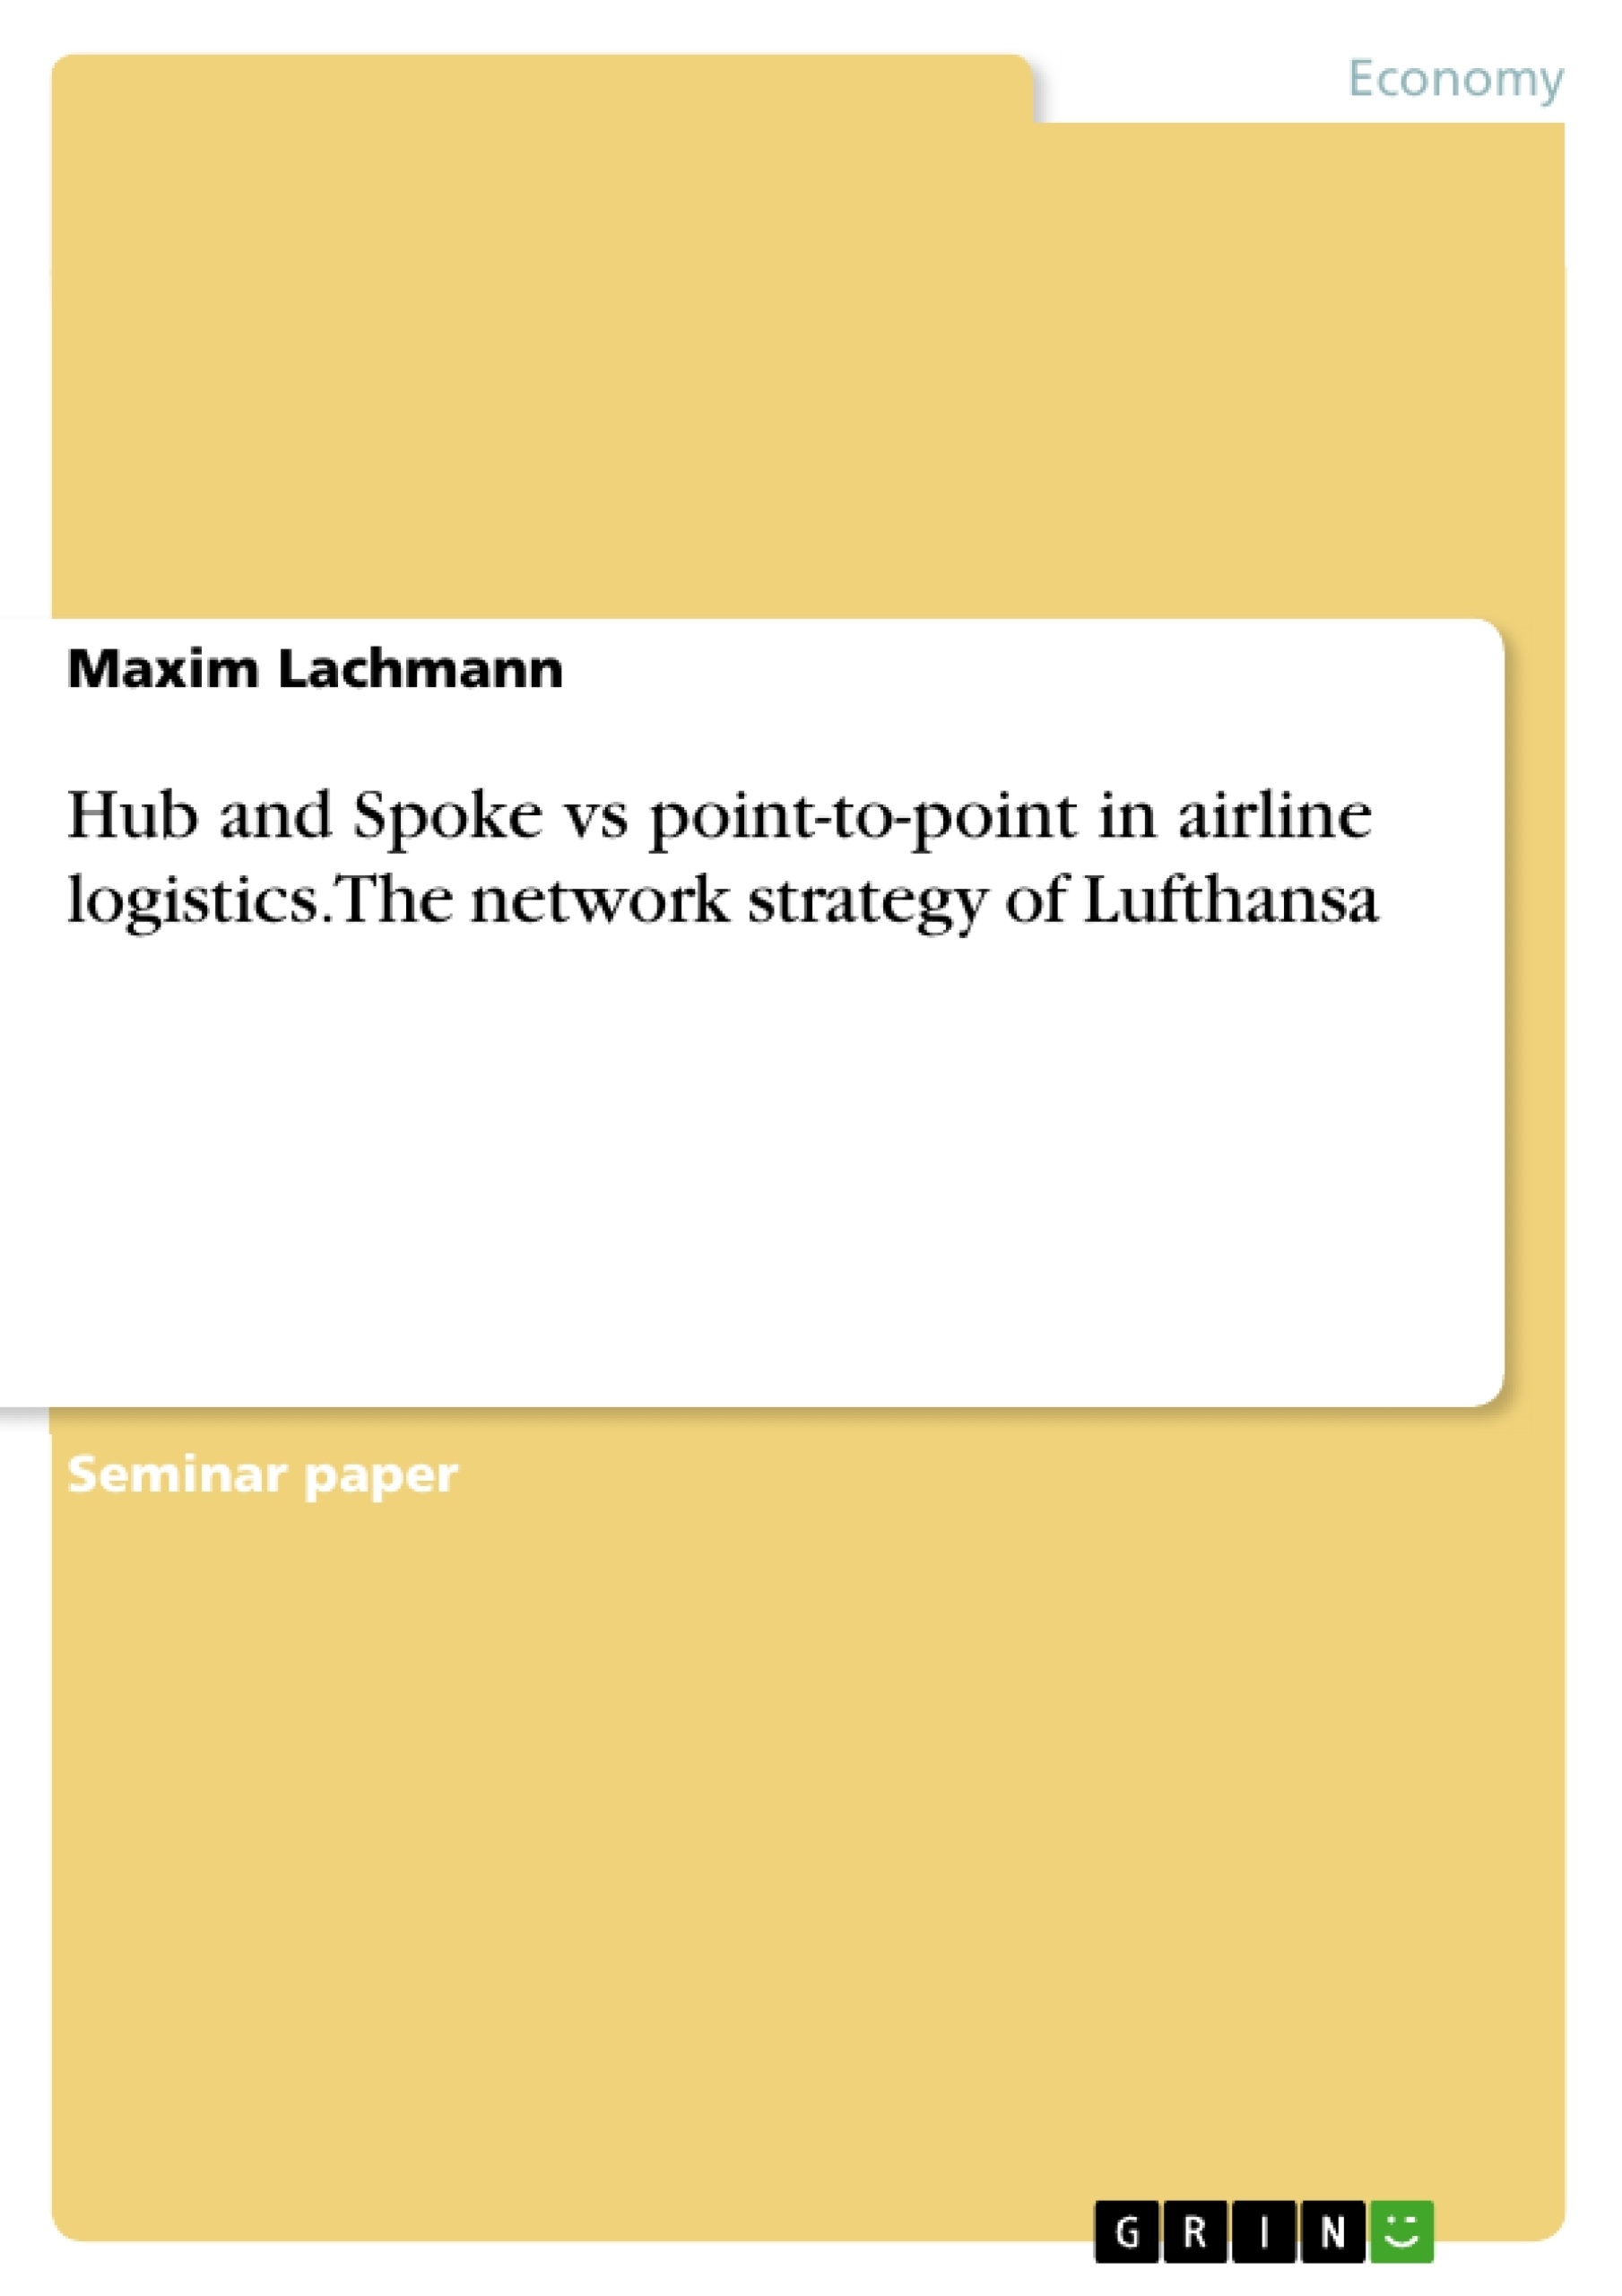 Título: Hub and Spoke vs point-to-point in airline logistics. The network strategy of Lufthansa